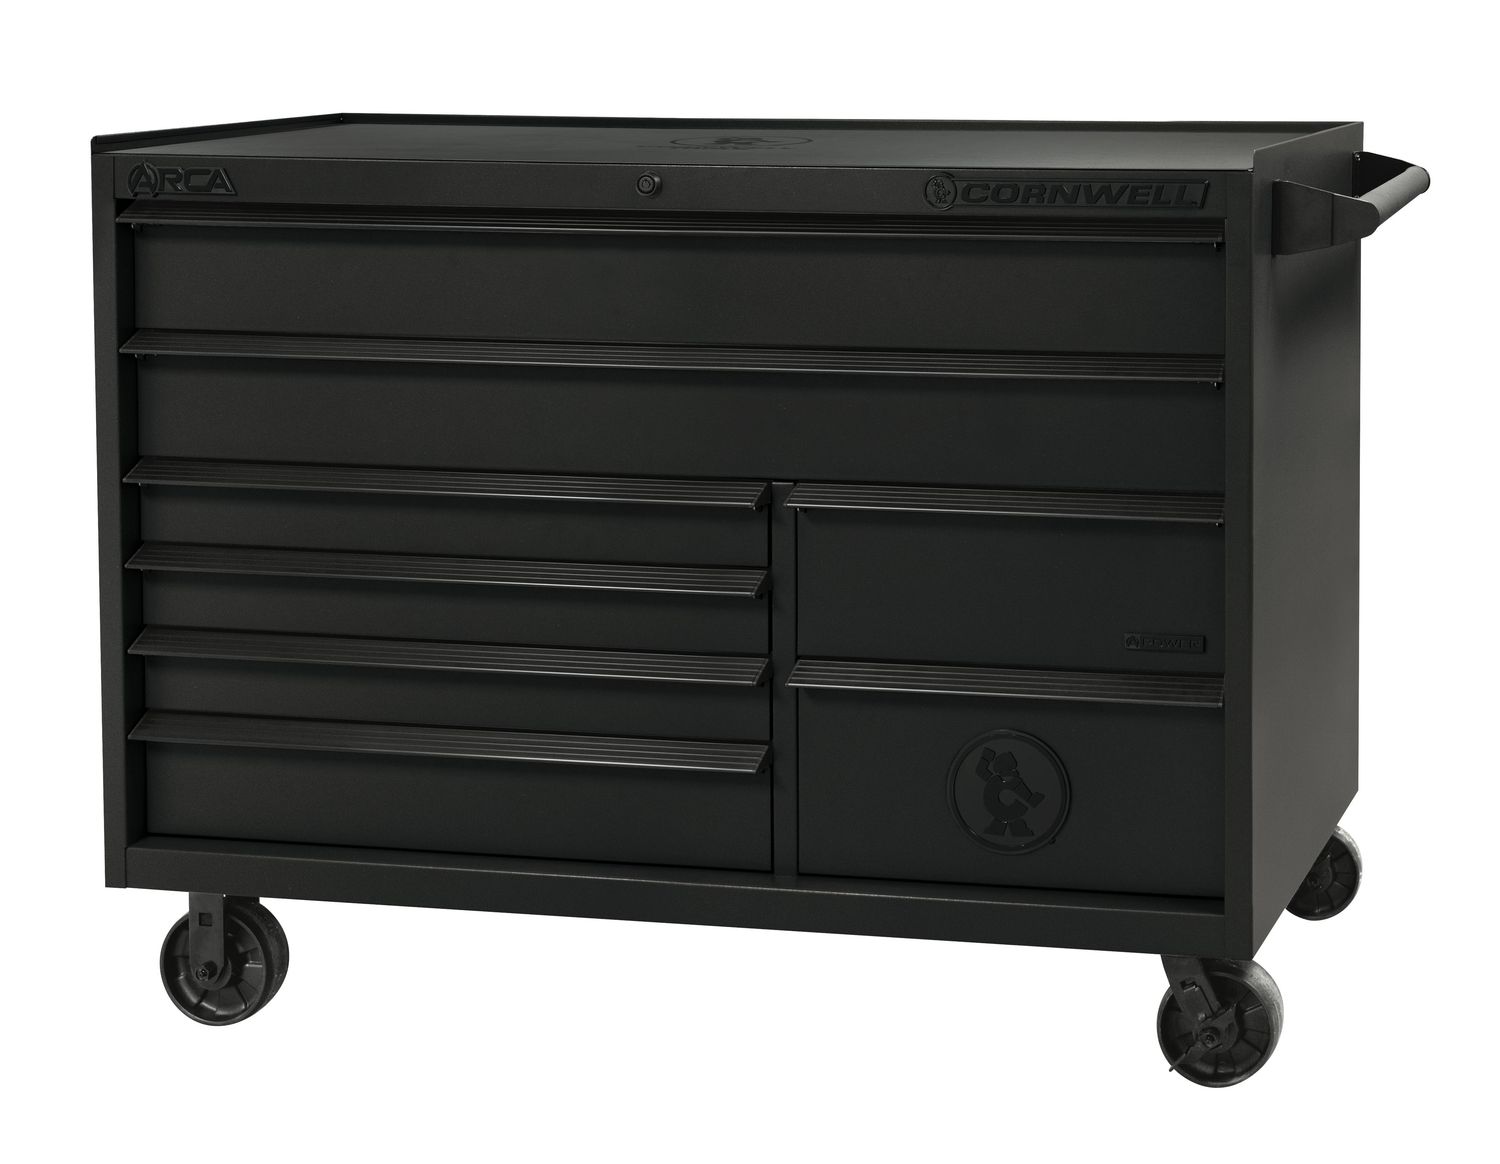 CTSASR578KSH - ARCA® 57” 8-Drawer Double Bank Roller Cabinet, Shadow